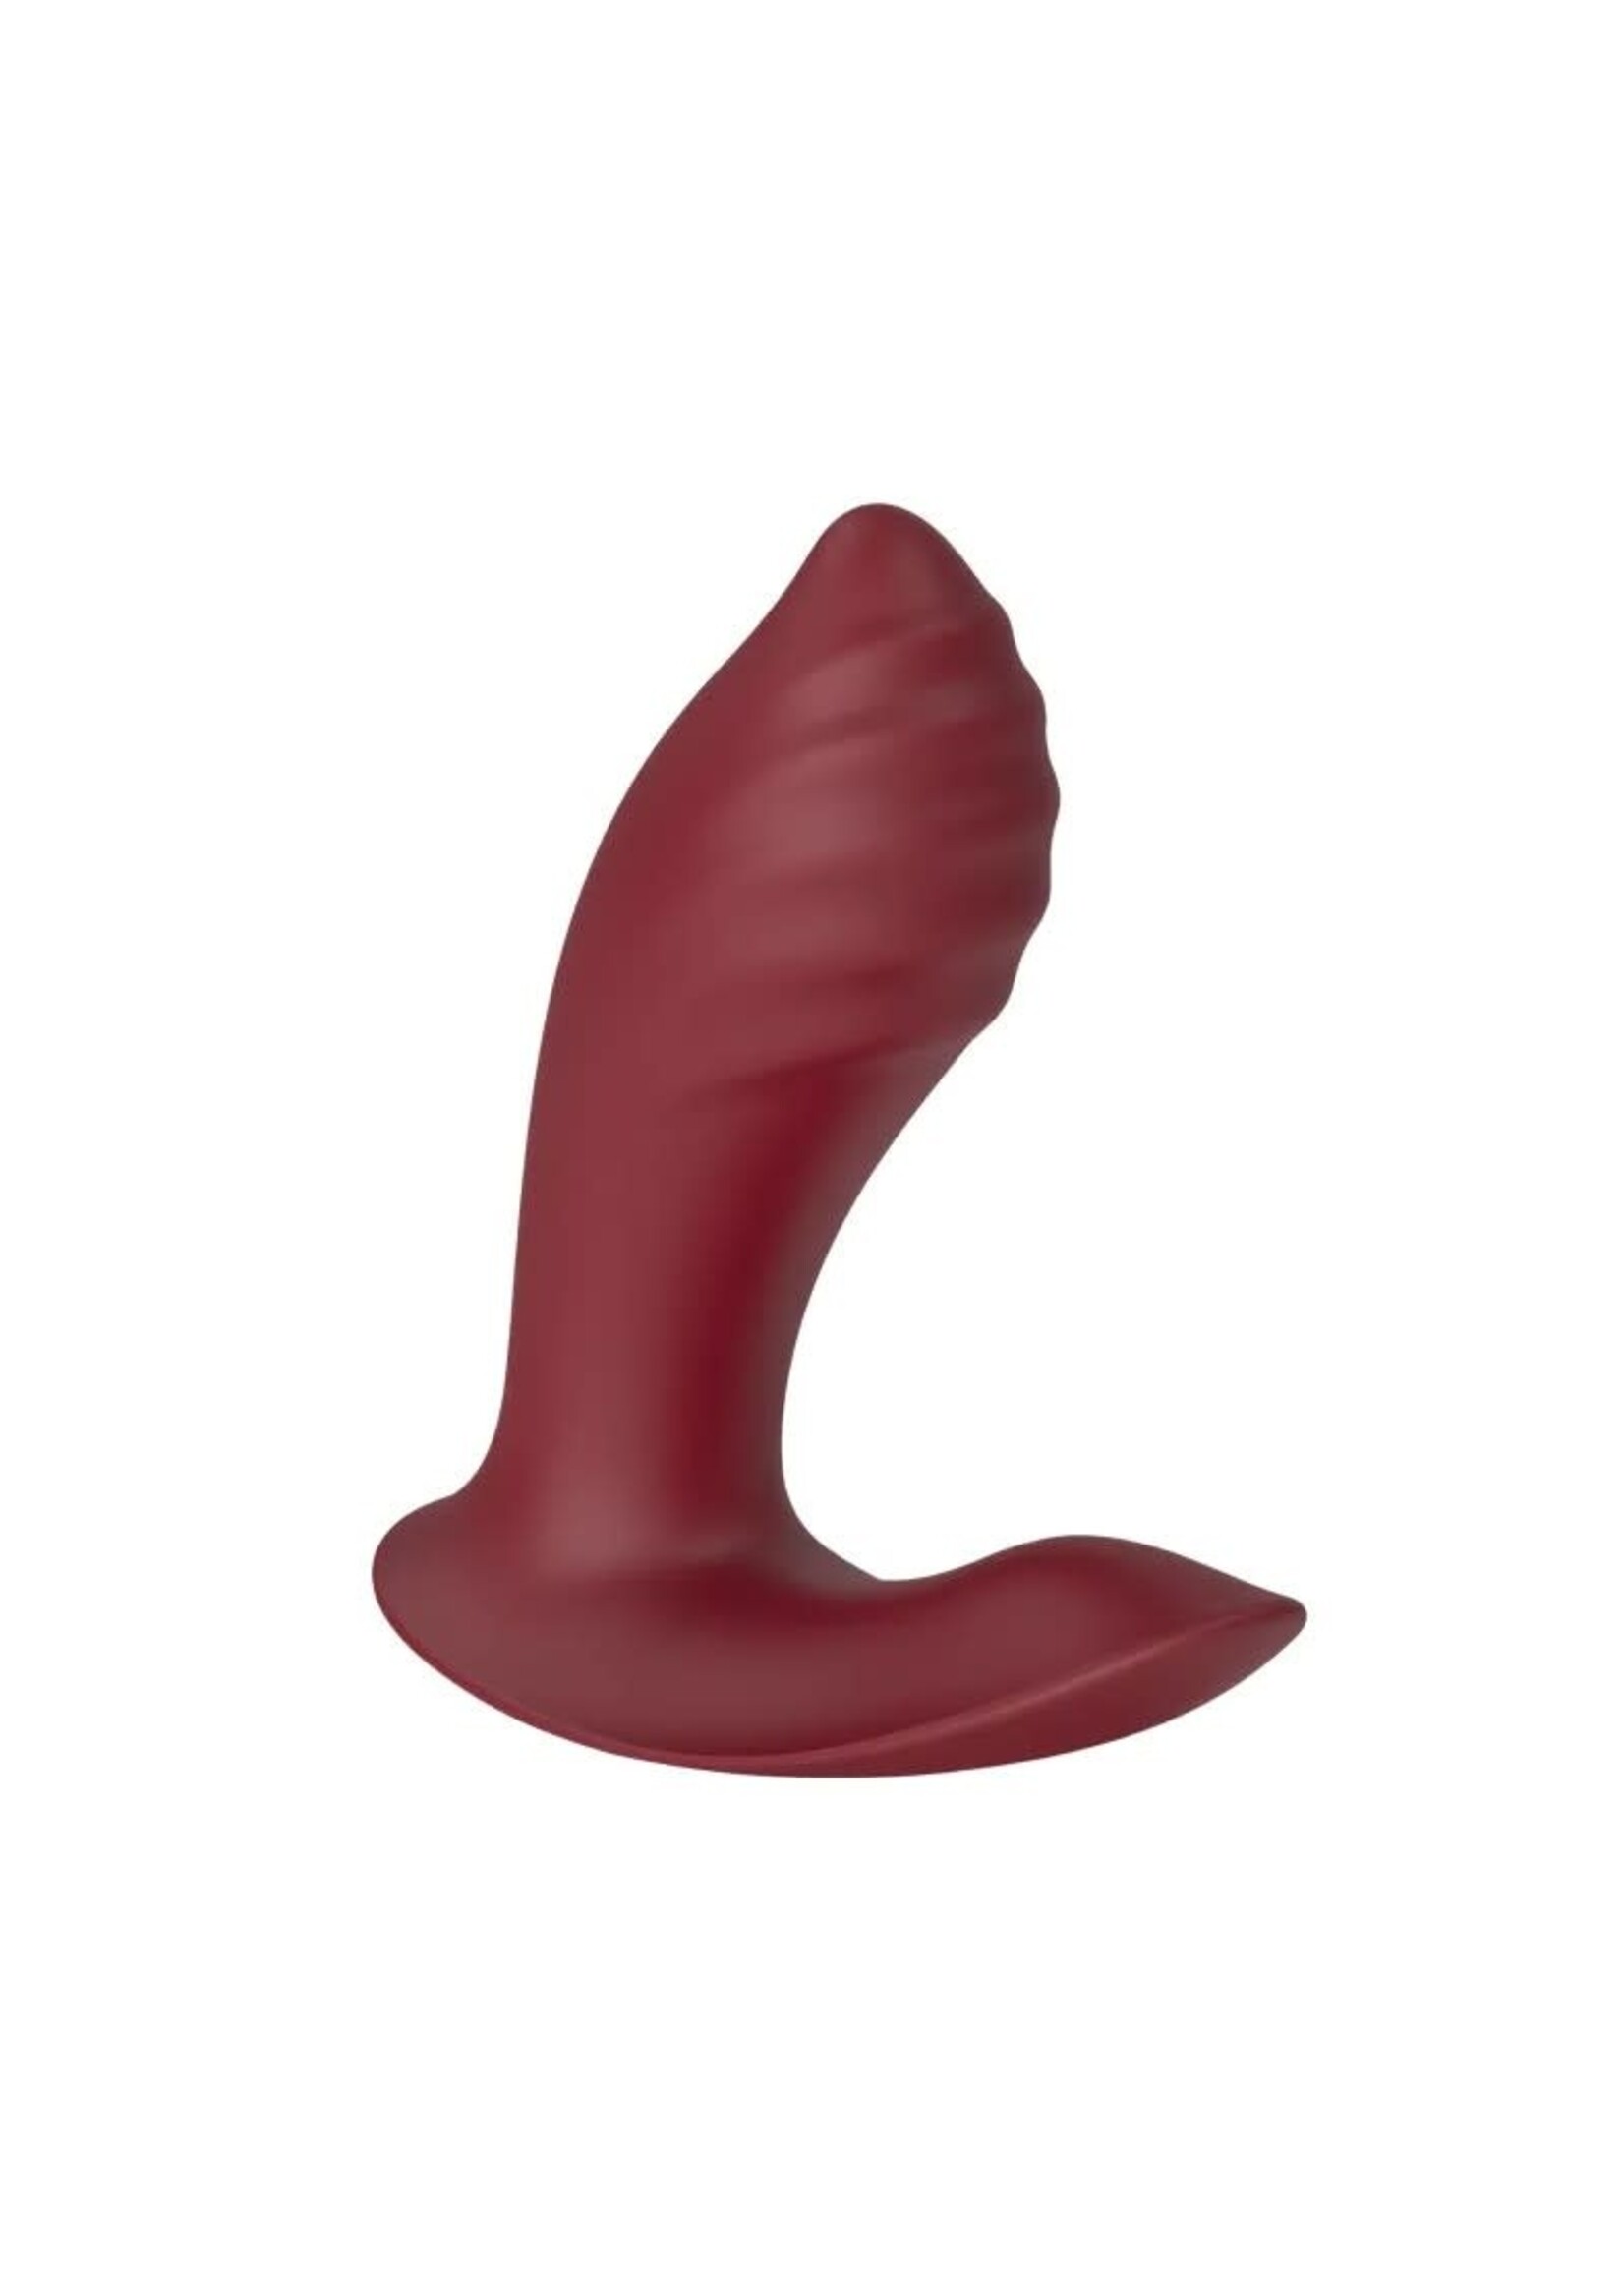 Loyte prostate vibrator with app control